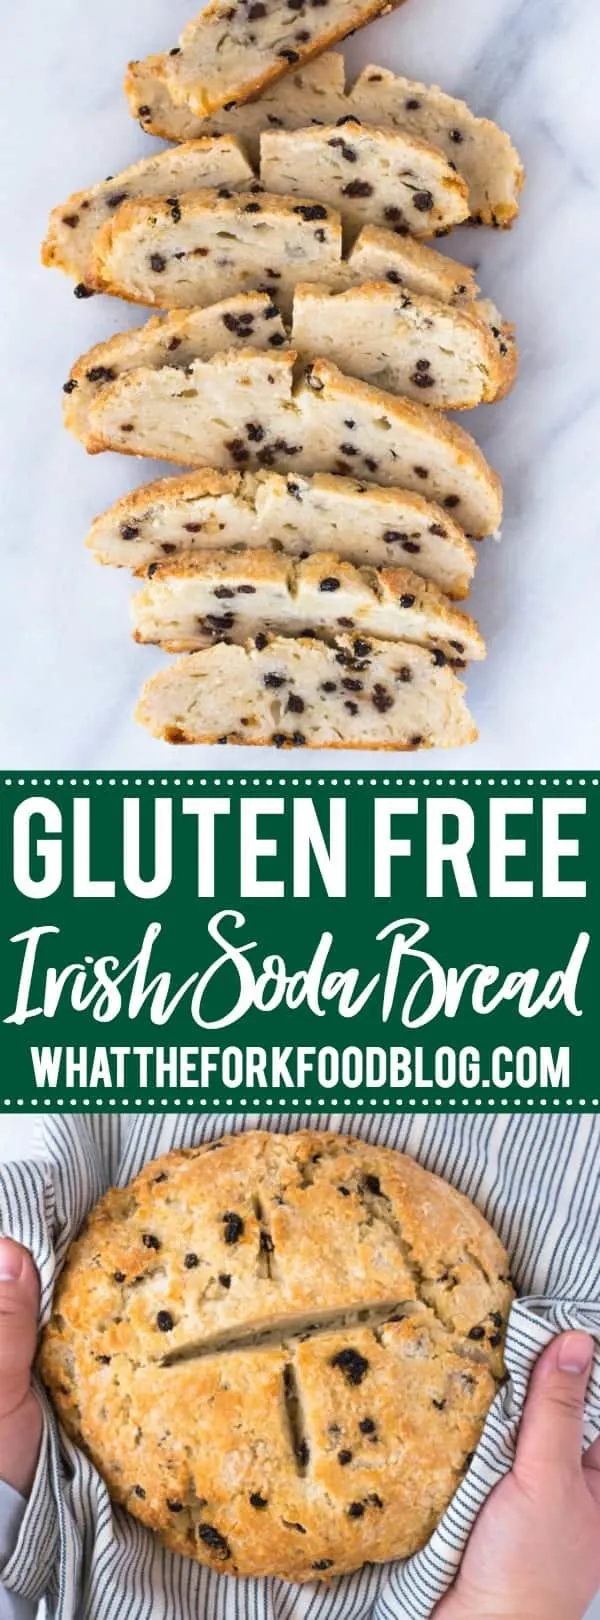 This Gluten Free Irish Soda Bread recipe was adapted from my grandmother’s recipe. Yes, she’s Irish! This recipe can be made with dairy or it can be made into a dairy free and vegan Irish Soda Bread. This quick bread recipe is perfect for celebrating St. Patrick's Day. Recipe from @whattheforkblog | whattheforkfoodblog.com | gluten free baking recipes | gluten free bread recipes | #glutenfree #stpatricksday #glutenfreebread #bread #irishsodabread #recipe